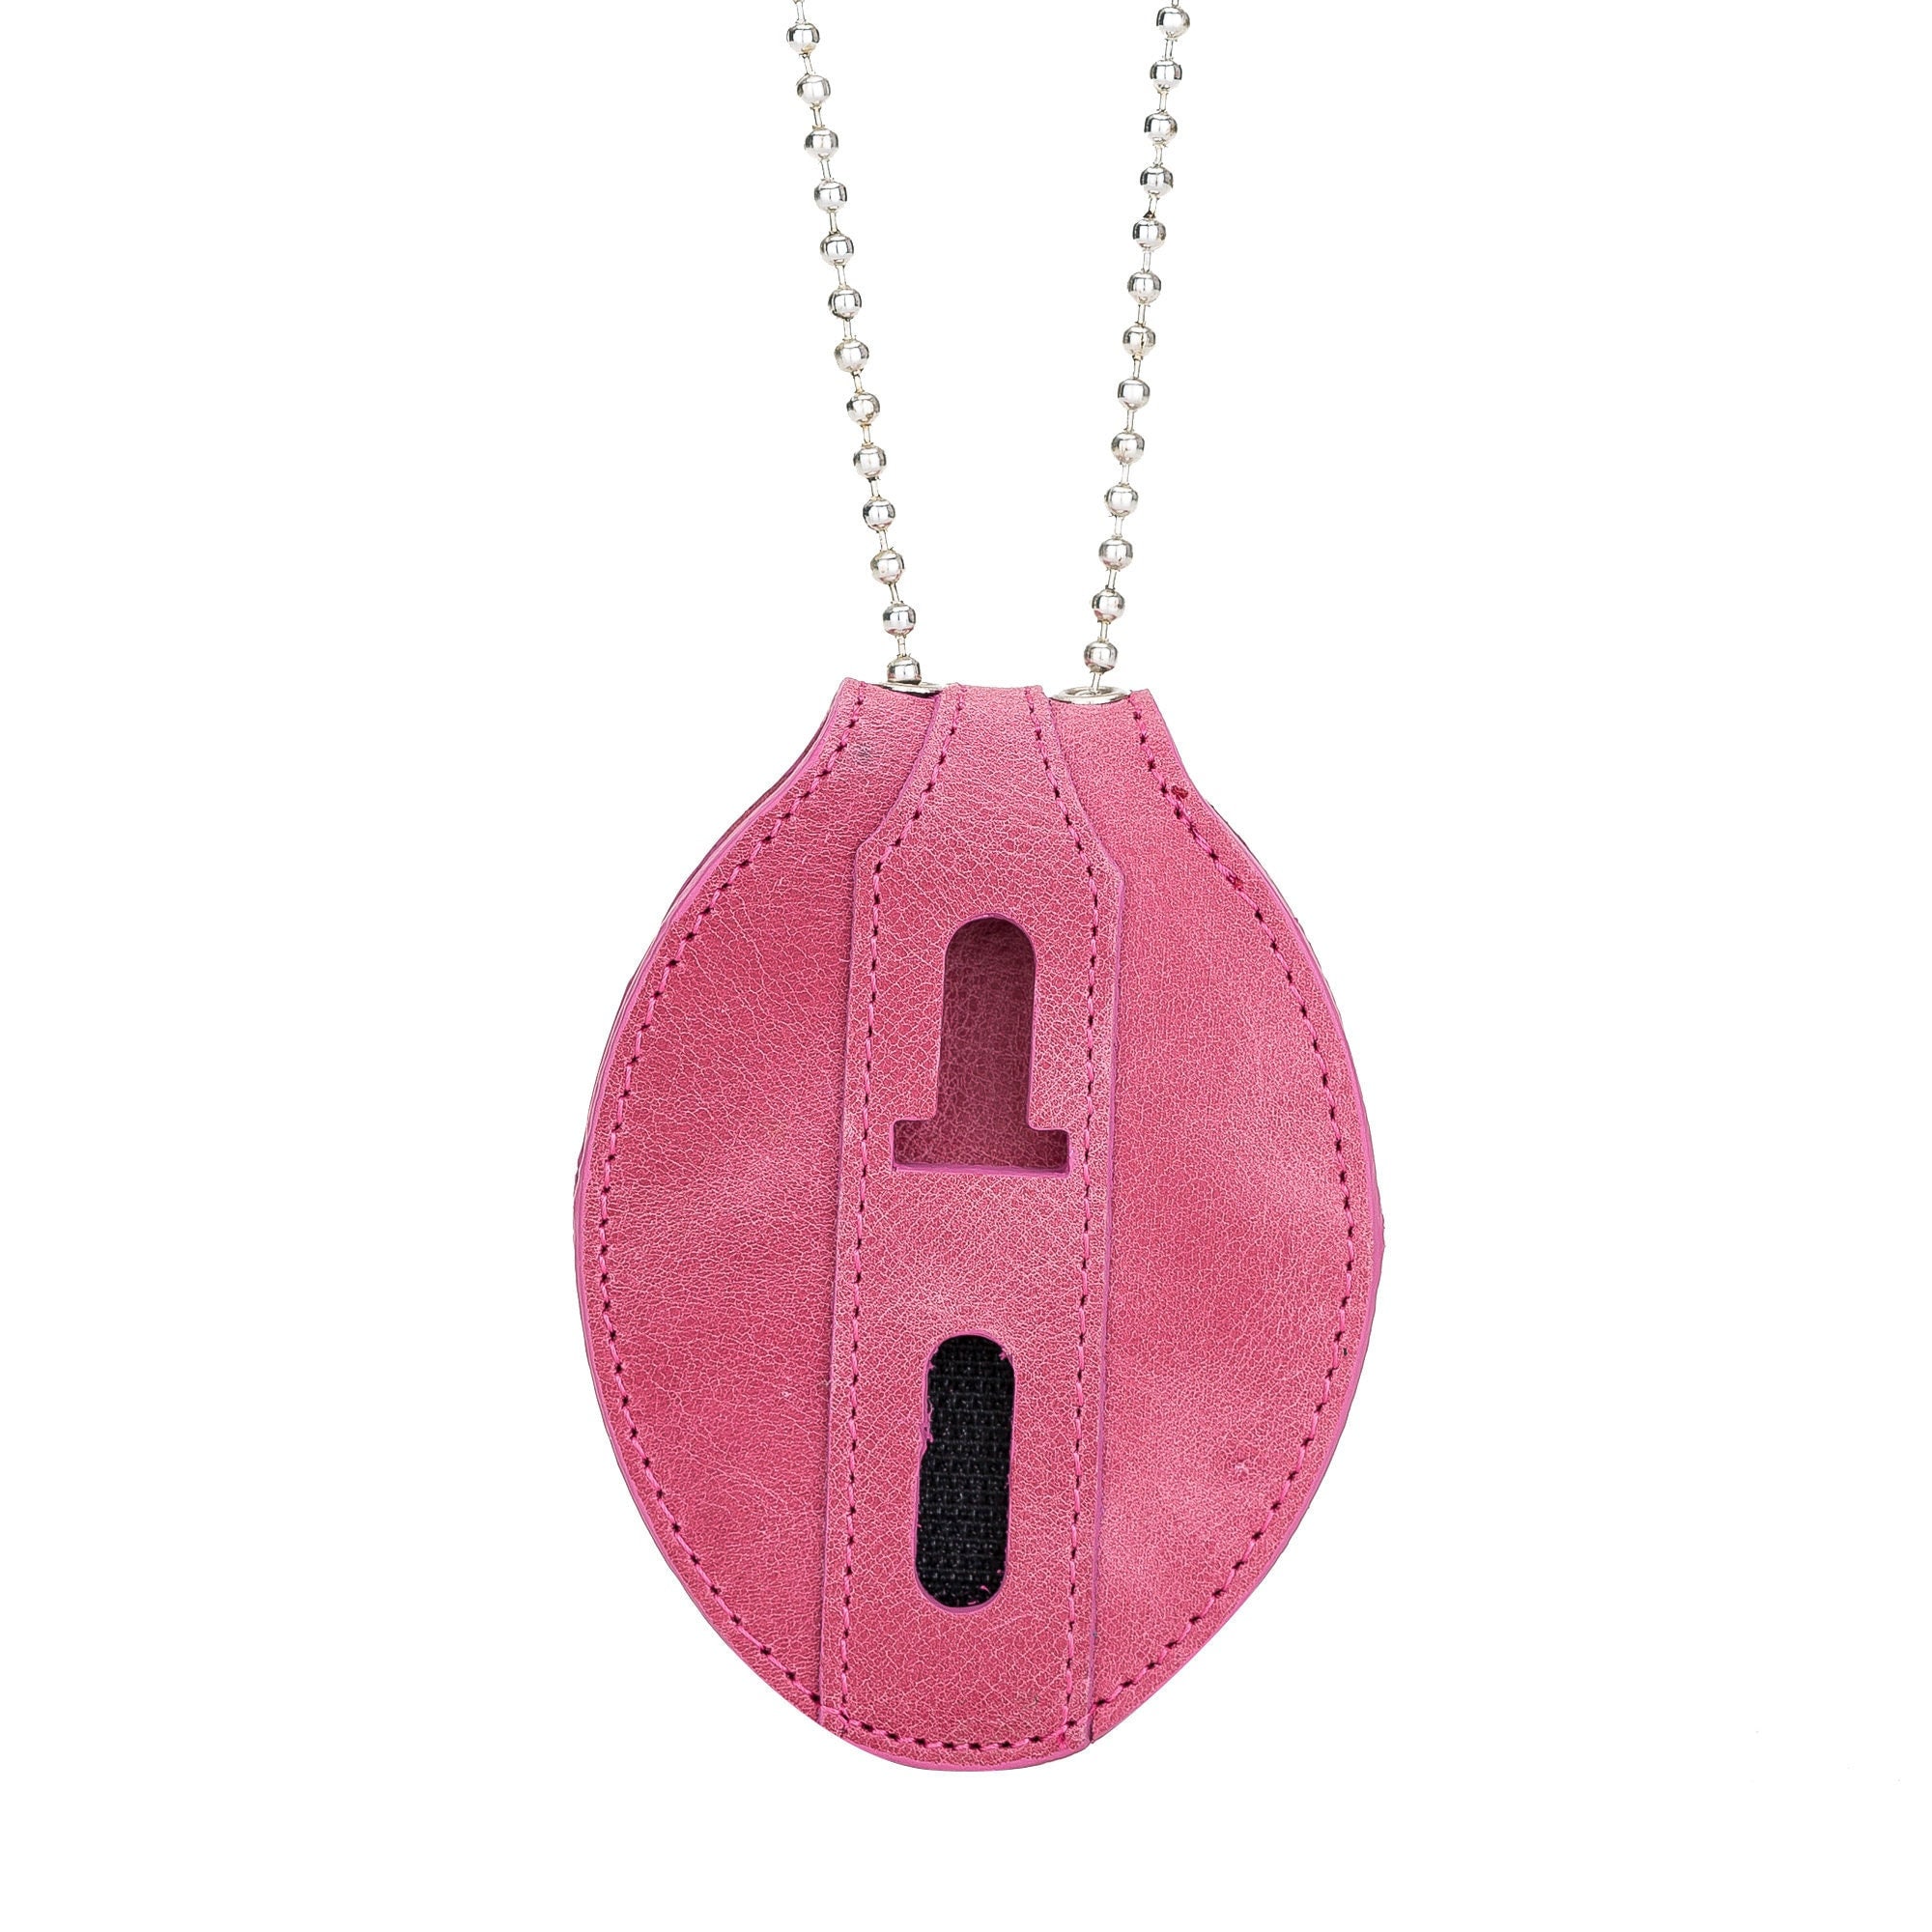 Dusty Rose Pink Full Grain Leather Oval Police Badge Holder Belt Clip - Optional to Use Around The Neck